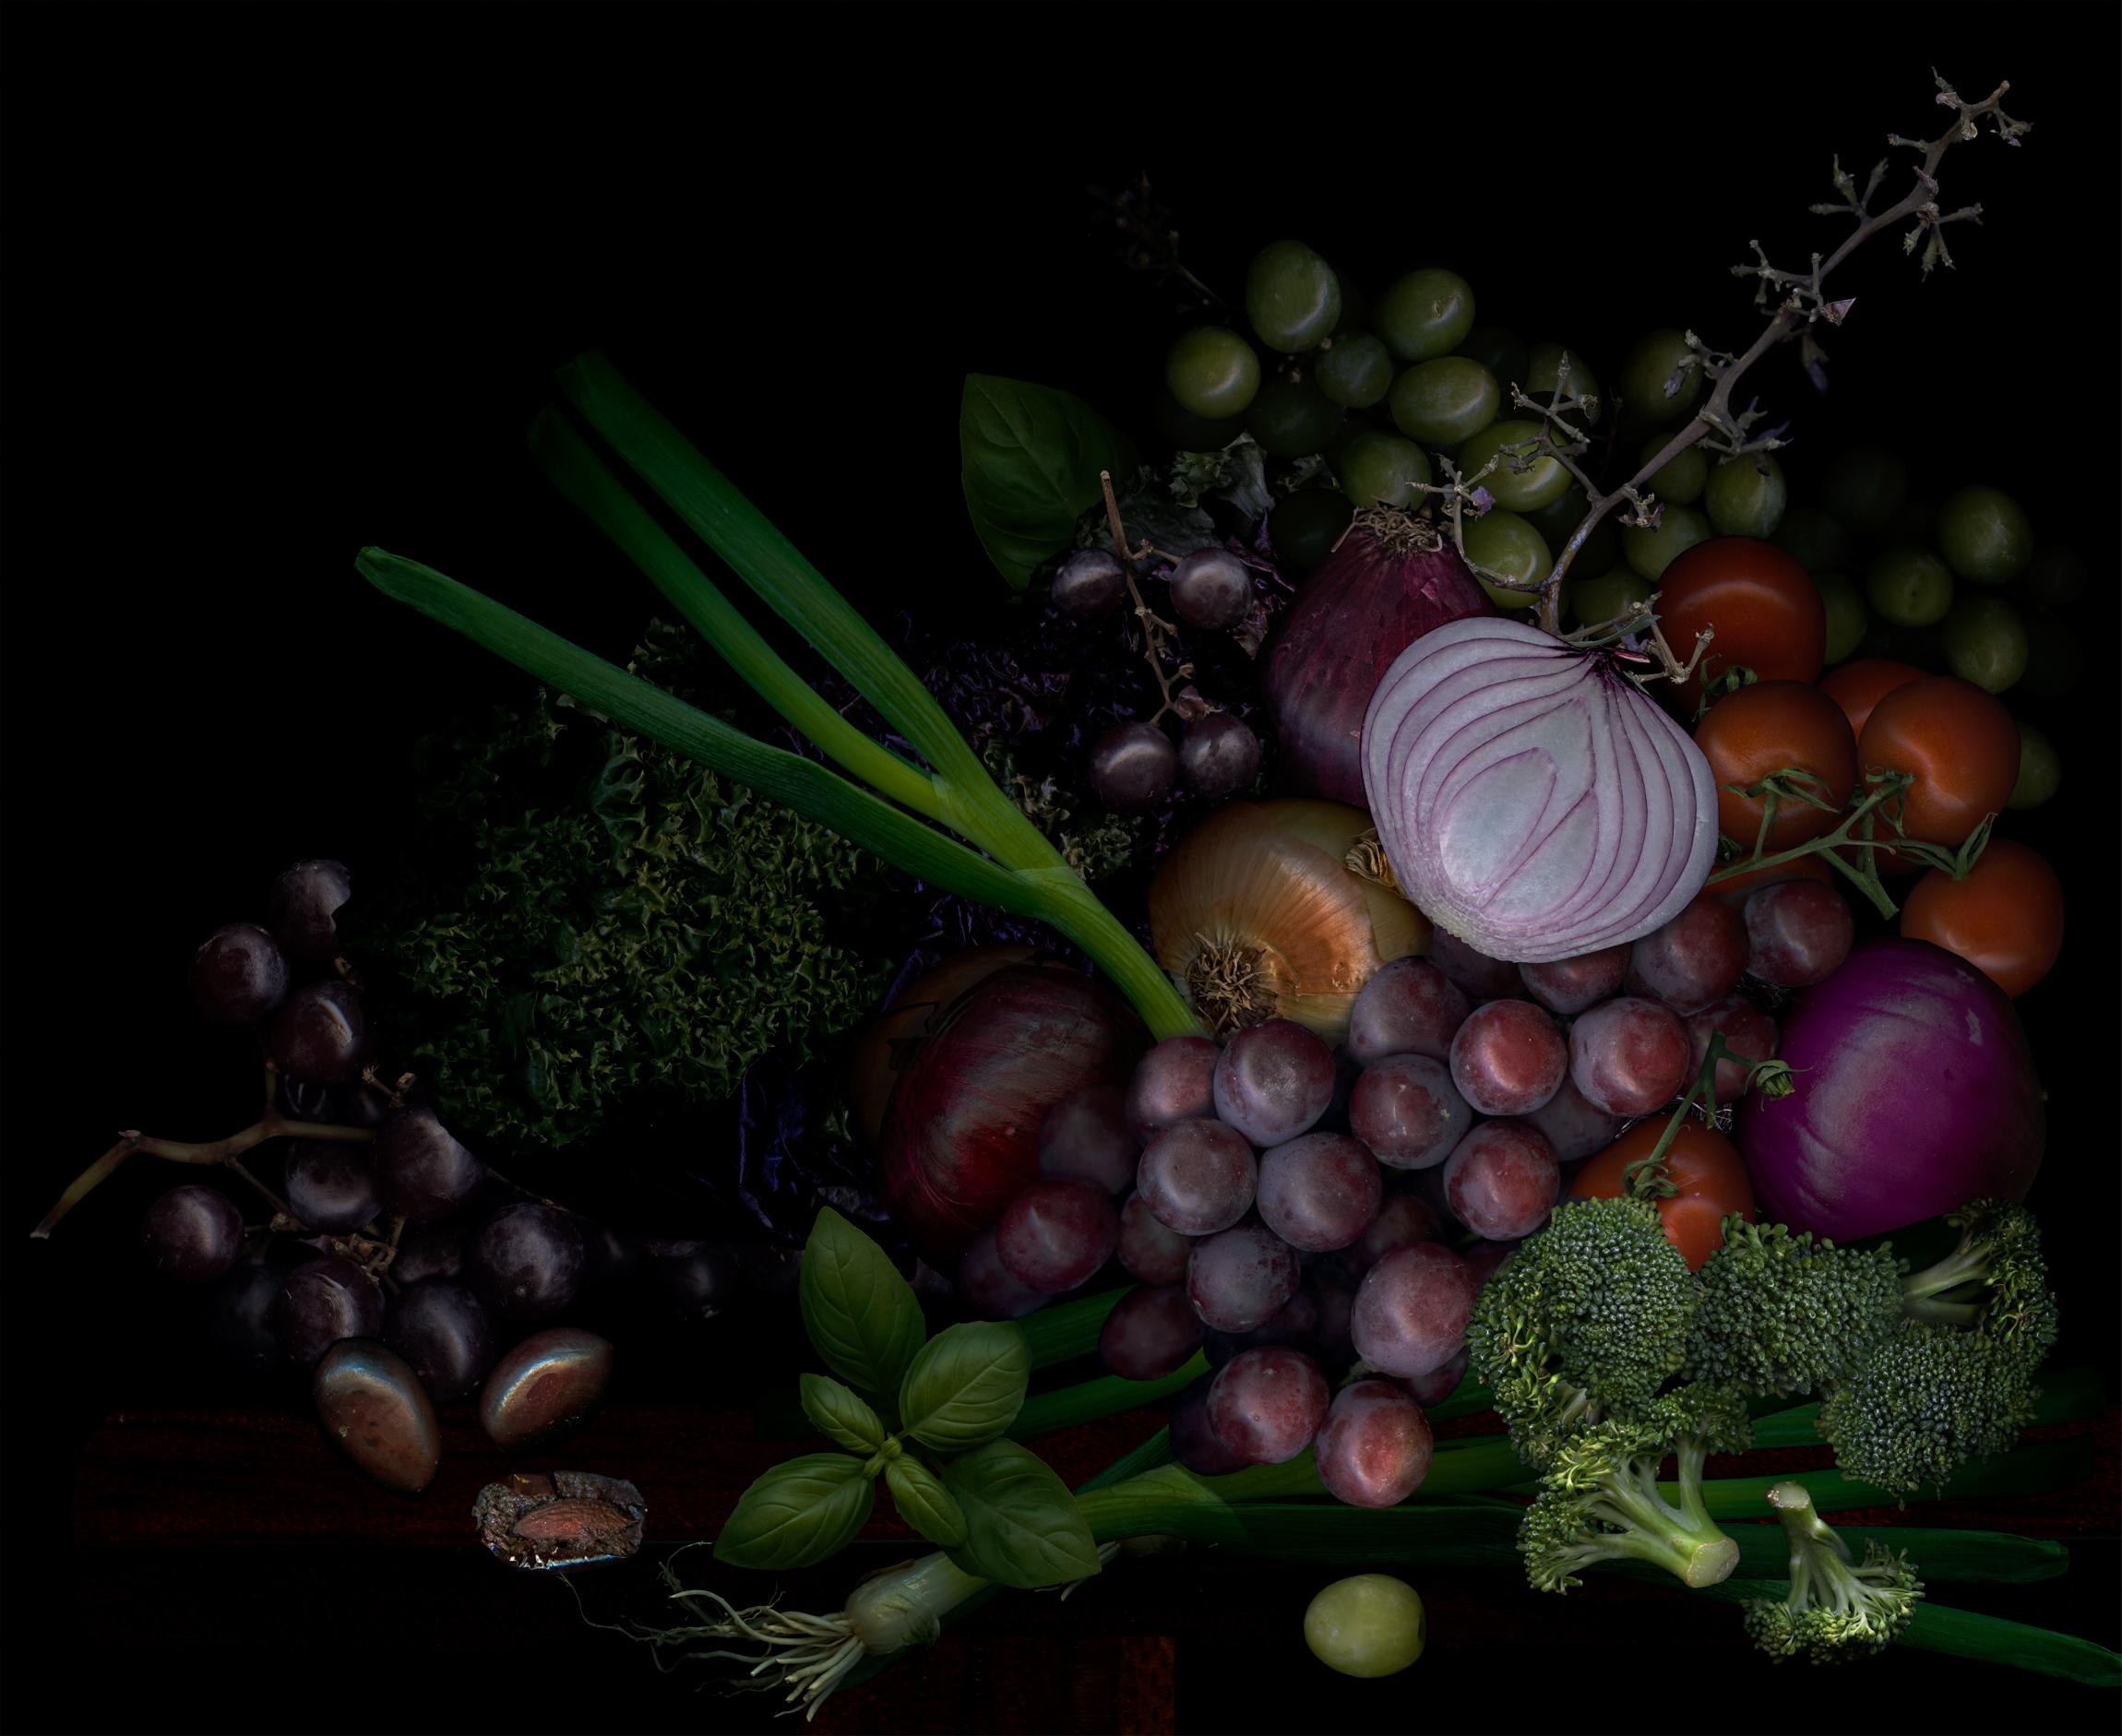 Zoltan Gerliczki Still-Life Photograph - Fruits and vegetables from my garden #8 Digital Collage Color Photograph